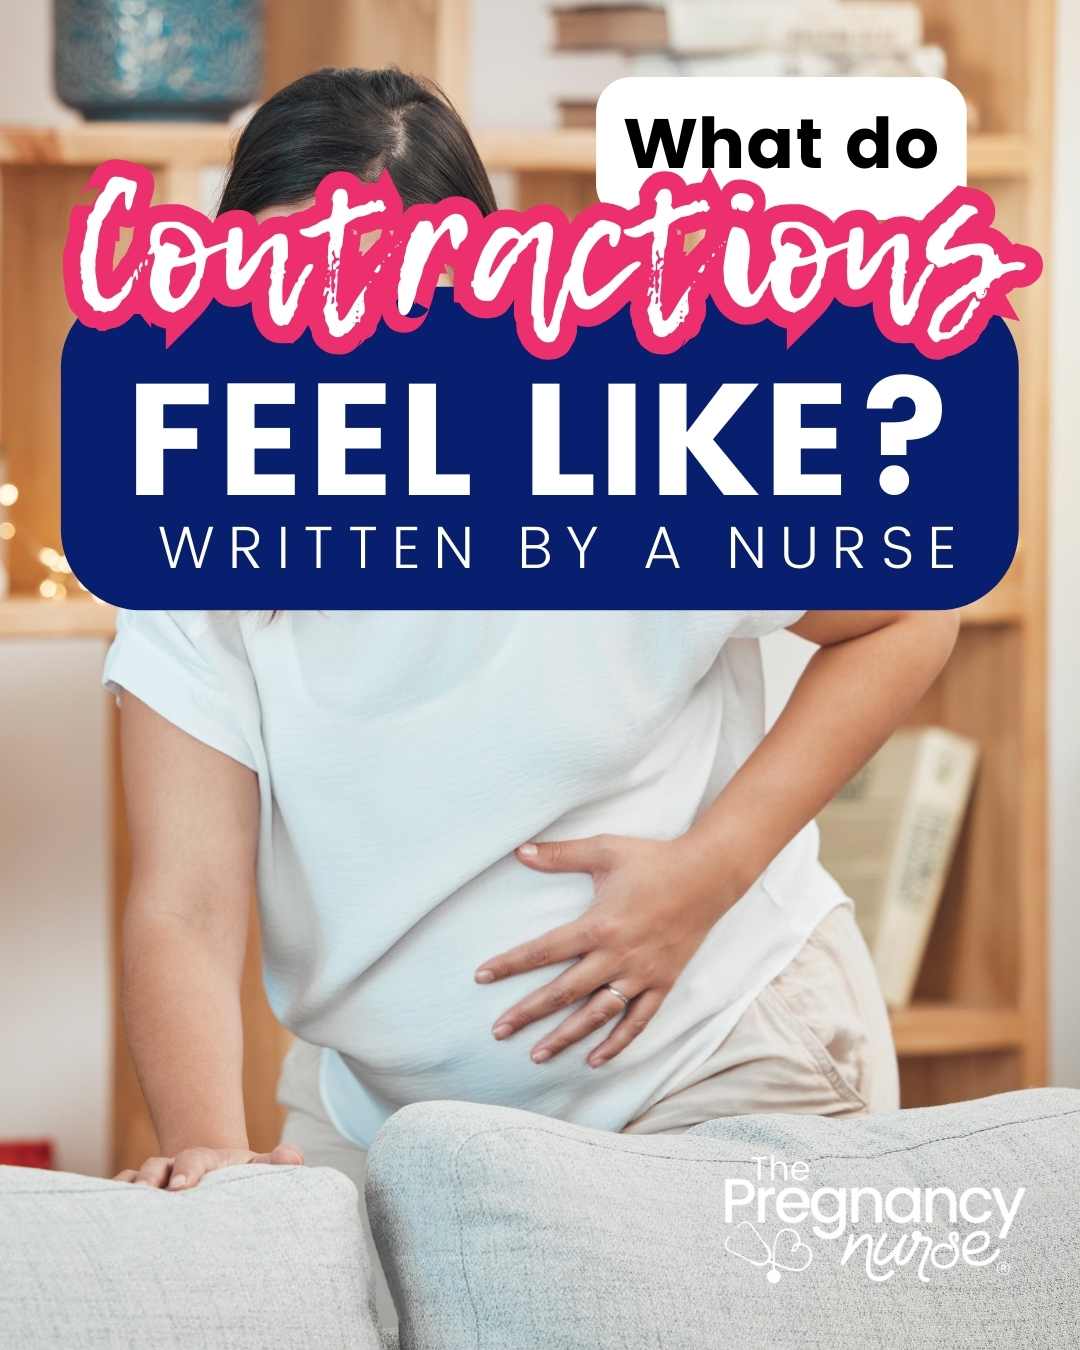 Labor contractions are tricky. Contractions feel different for every person, and what contractions feel like for one person may differ for you. False labor can still be quite painful.